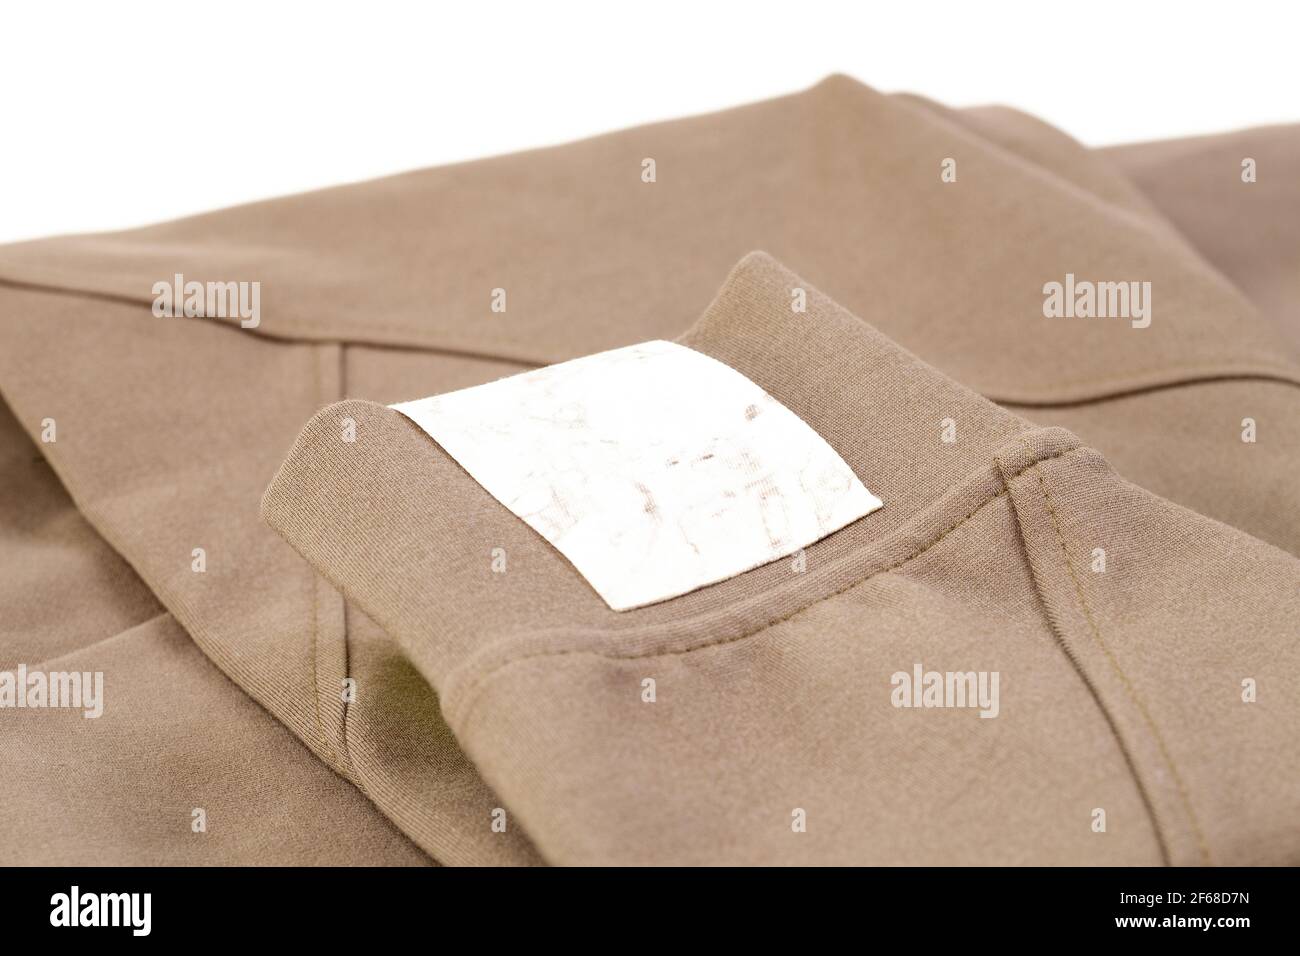 macro mock up empty white marble fabric patch for brand logo, tag for name or clothing care instructions Stock Photo